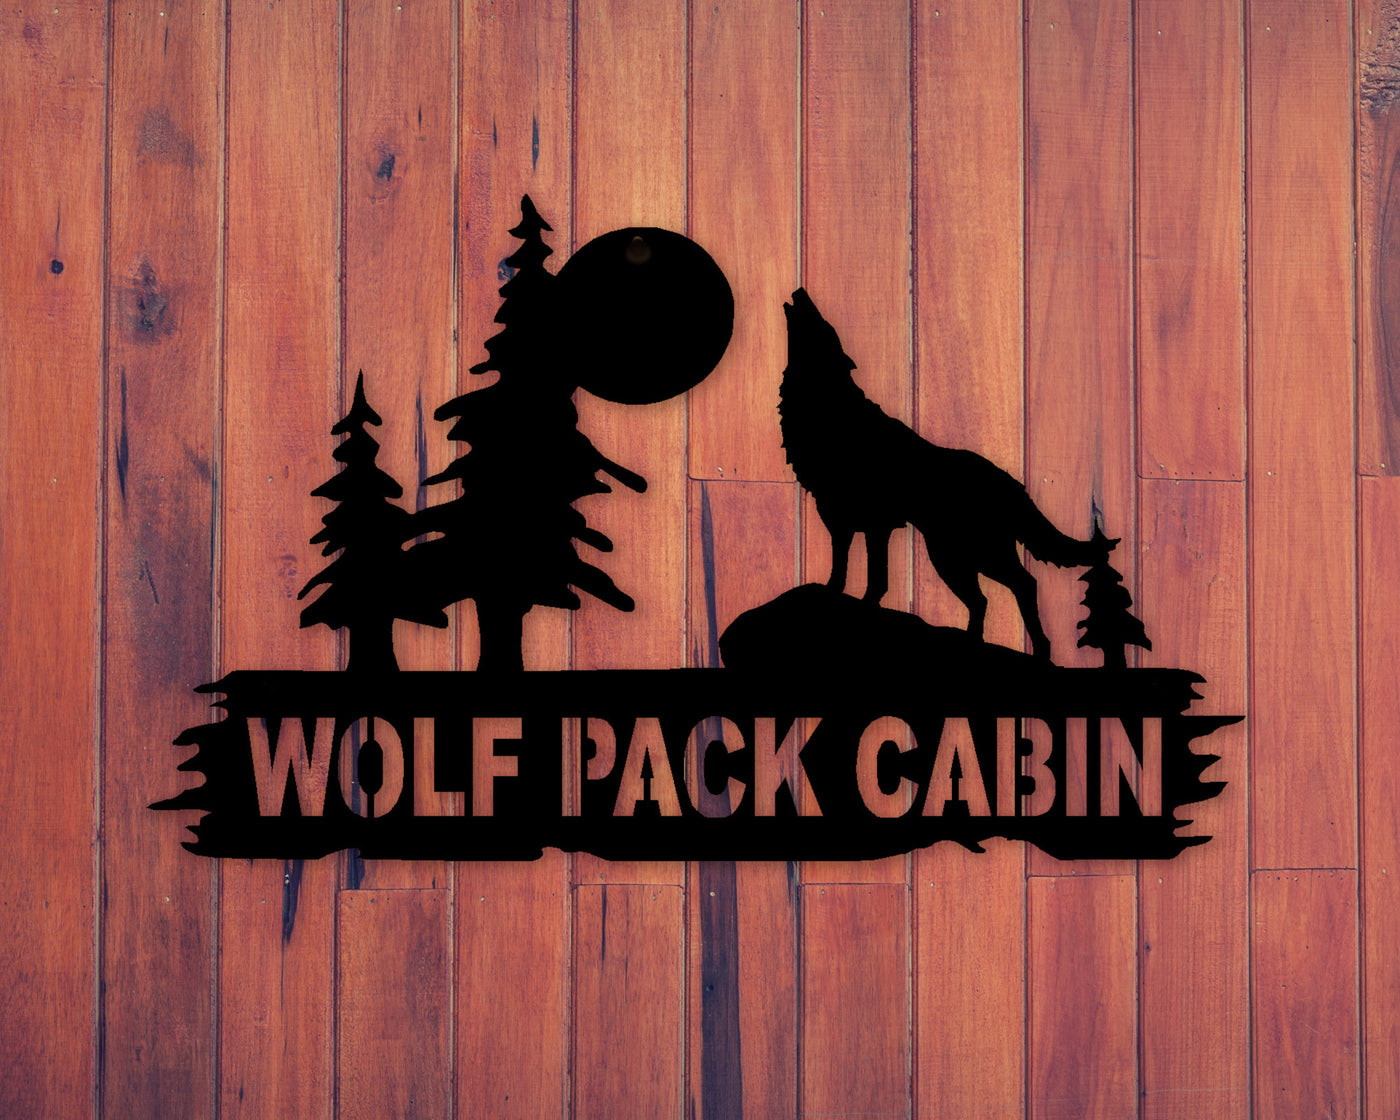 Personalized Wolf Metal Sign - Madison Iron and Wood - Metal Art - metal outdoor decor - Steel deocrations - american made products - veteran owned business products - fencing decorations - fencing supplies - custom wall decorations - personalized wall signs - steel - decorative post caps - steel post caps - metal post caps - brackets - structural brackets - home improvement - easter - easter decorations - easter gift - easter yard decor